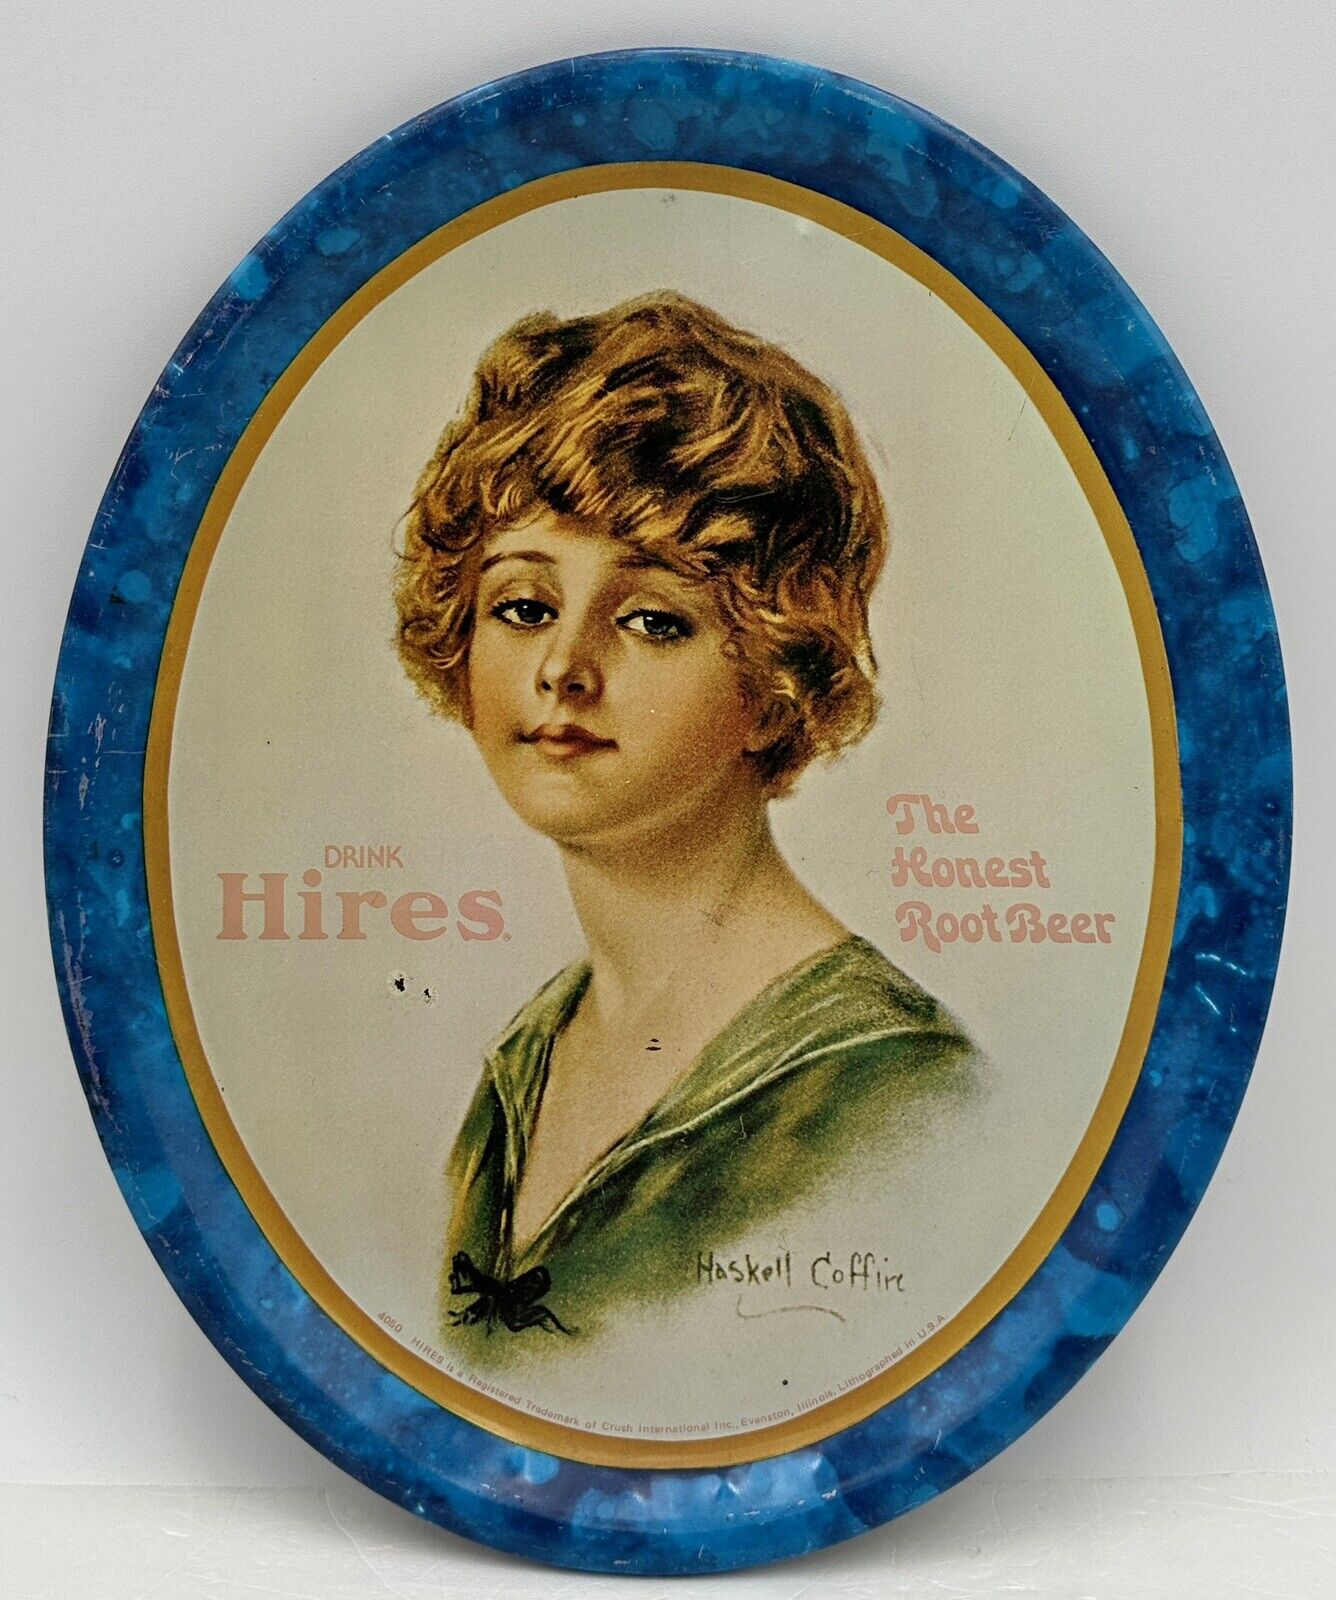 Vintage Hires Honest Root Beer Lady Oval Tin Tray William Haskell Coffin 4050